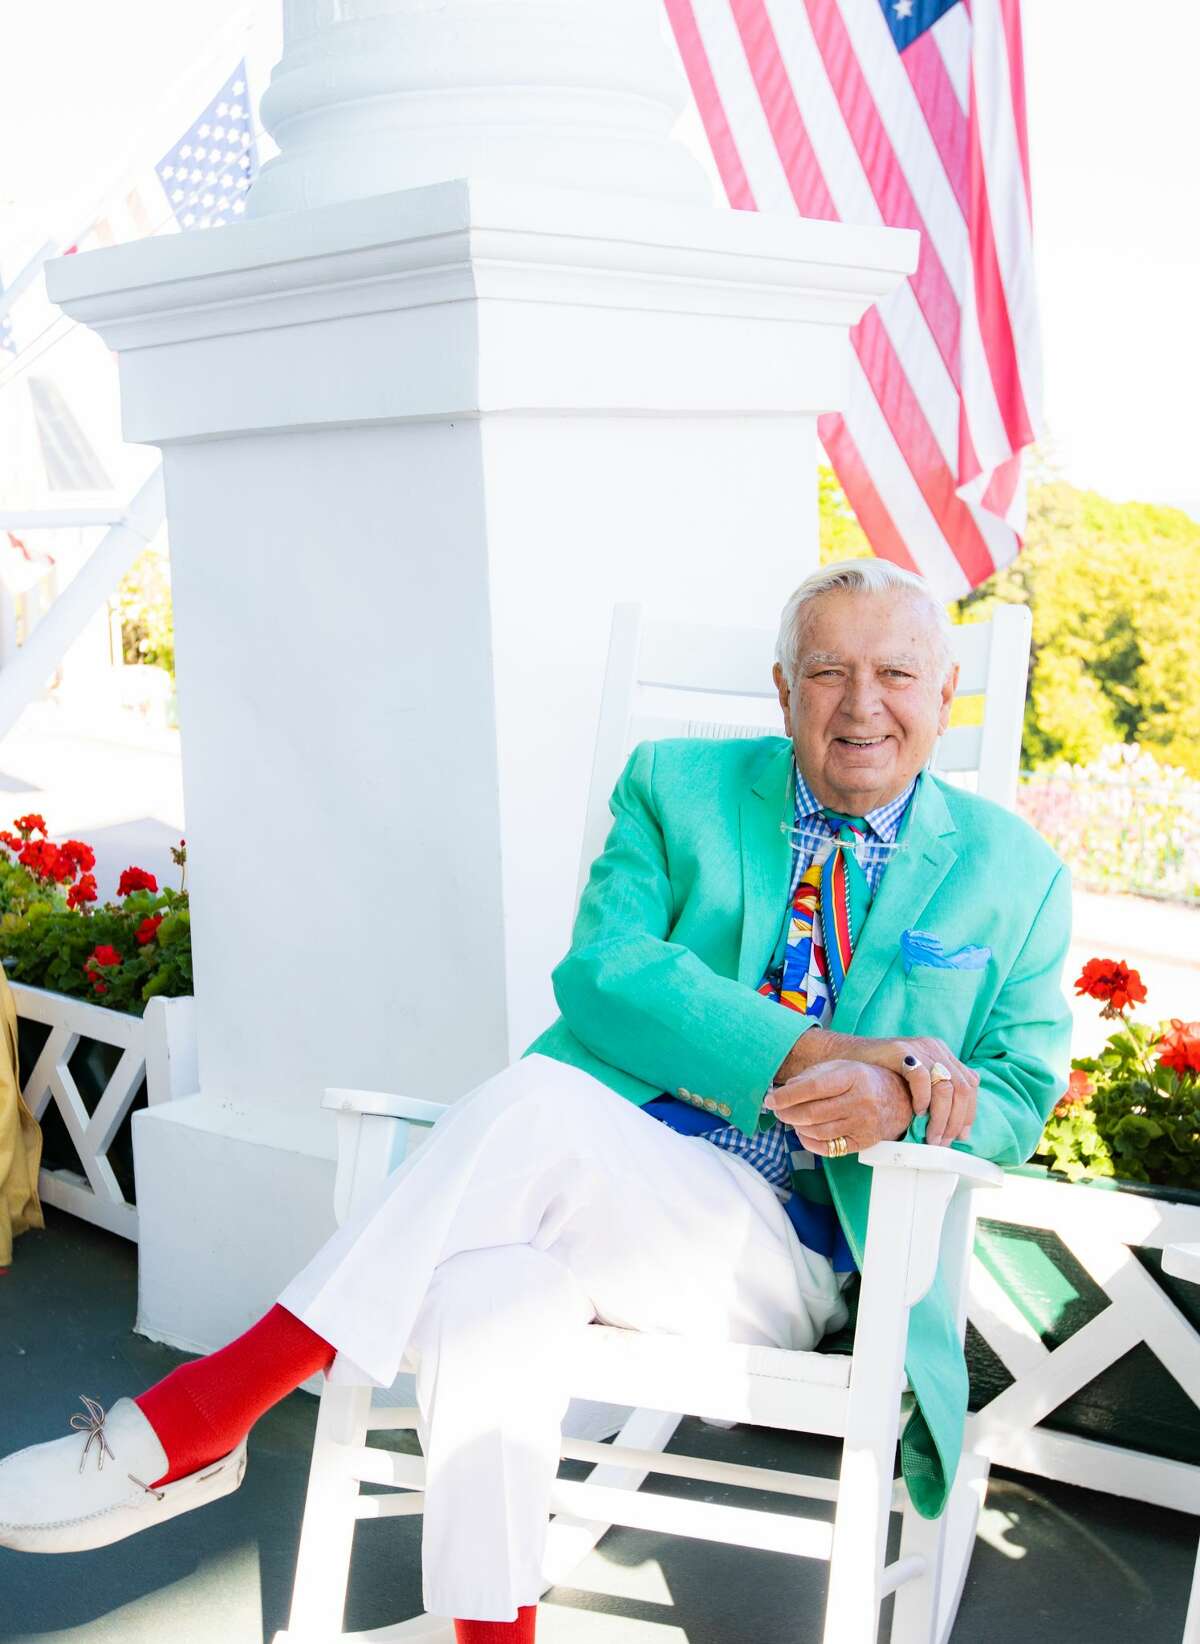 Interior designer Carleton Varney hosted decorating classes one weekend each summer at The Grand Hotel on Mackinac Island, Mich.